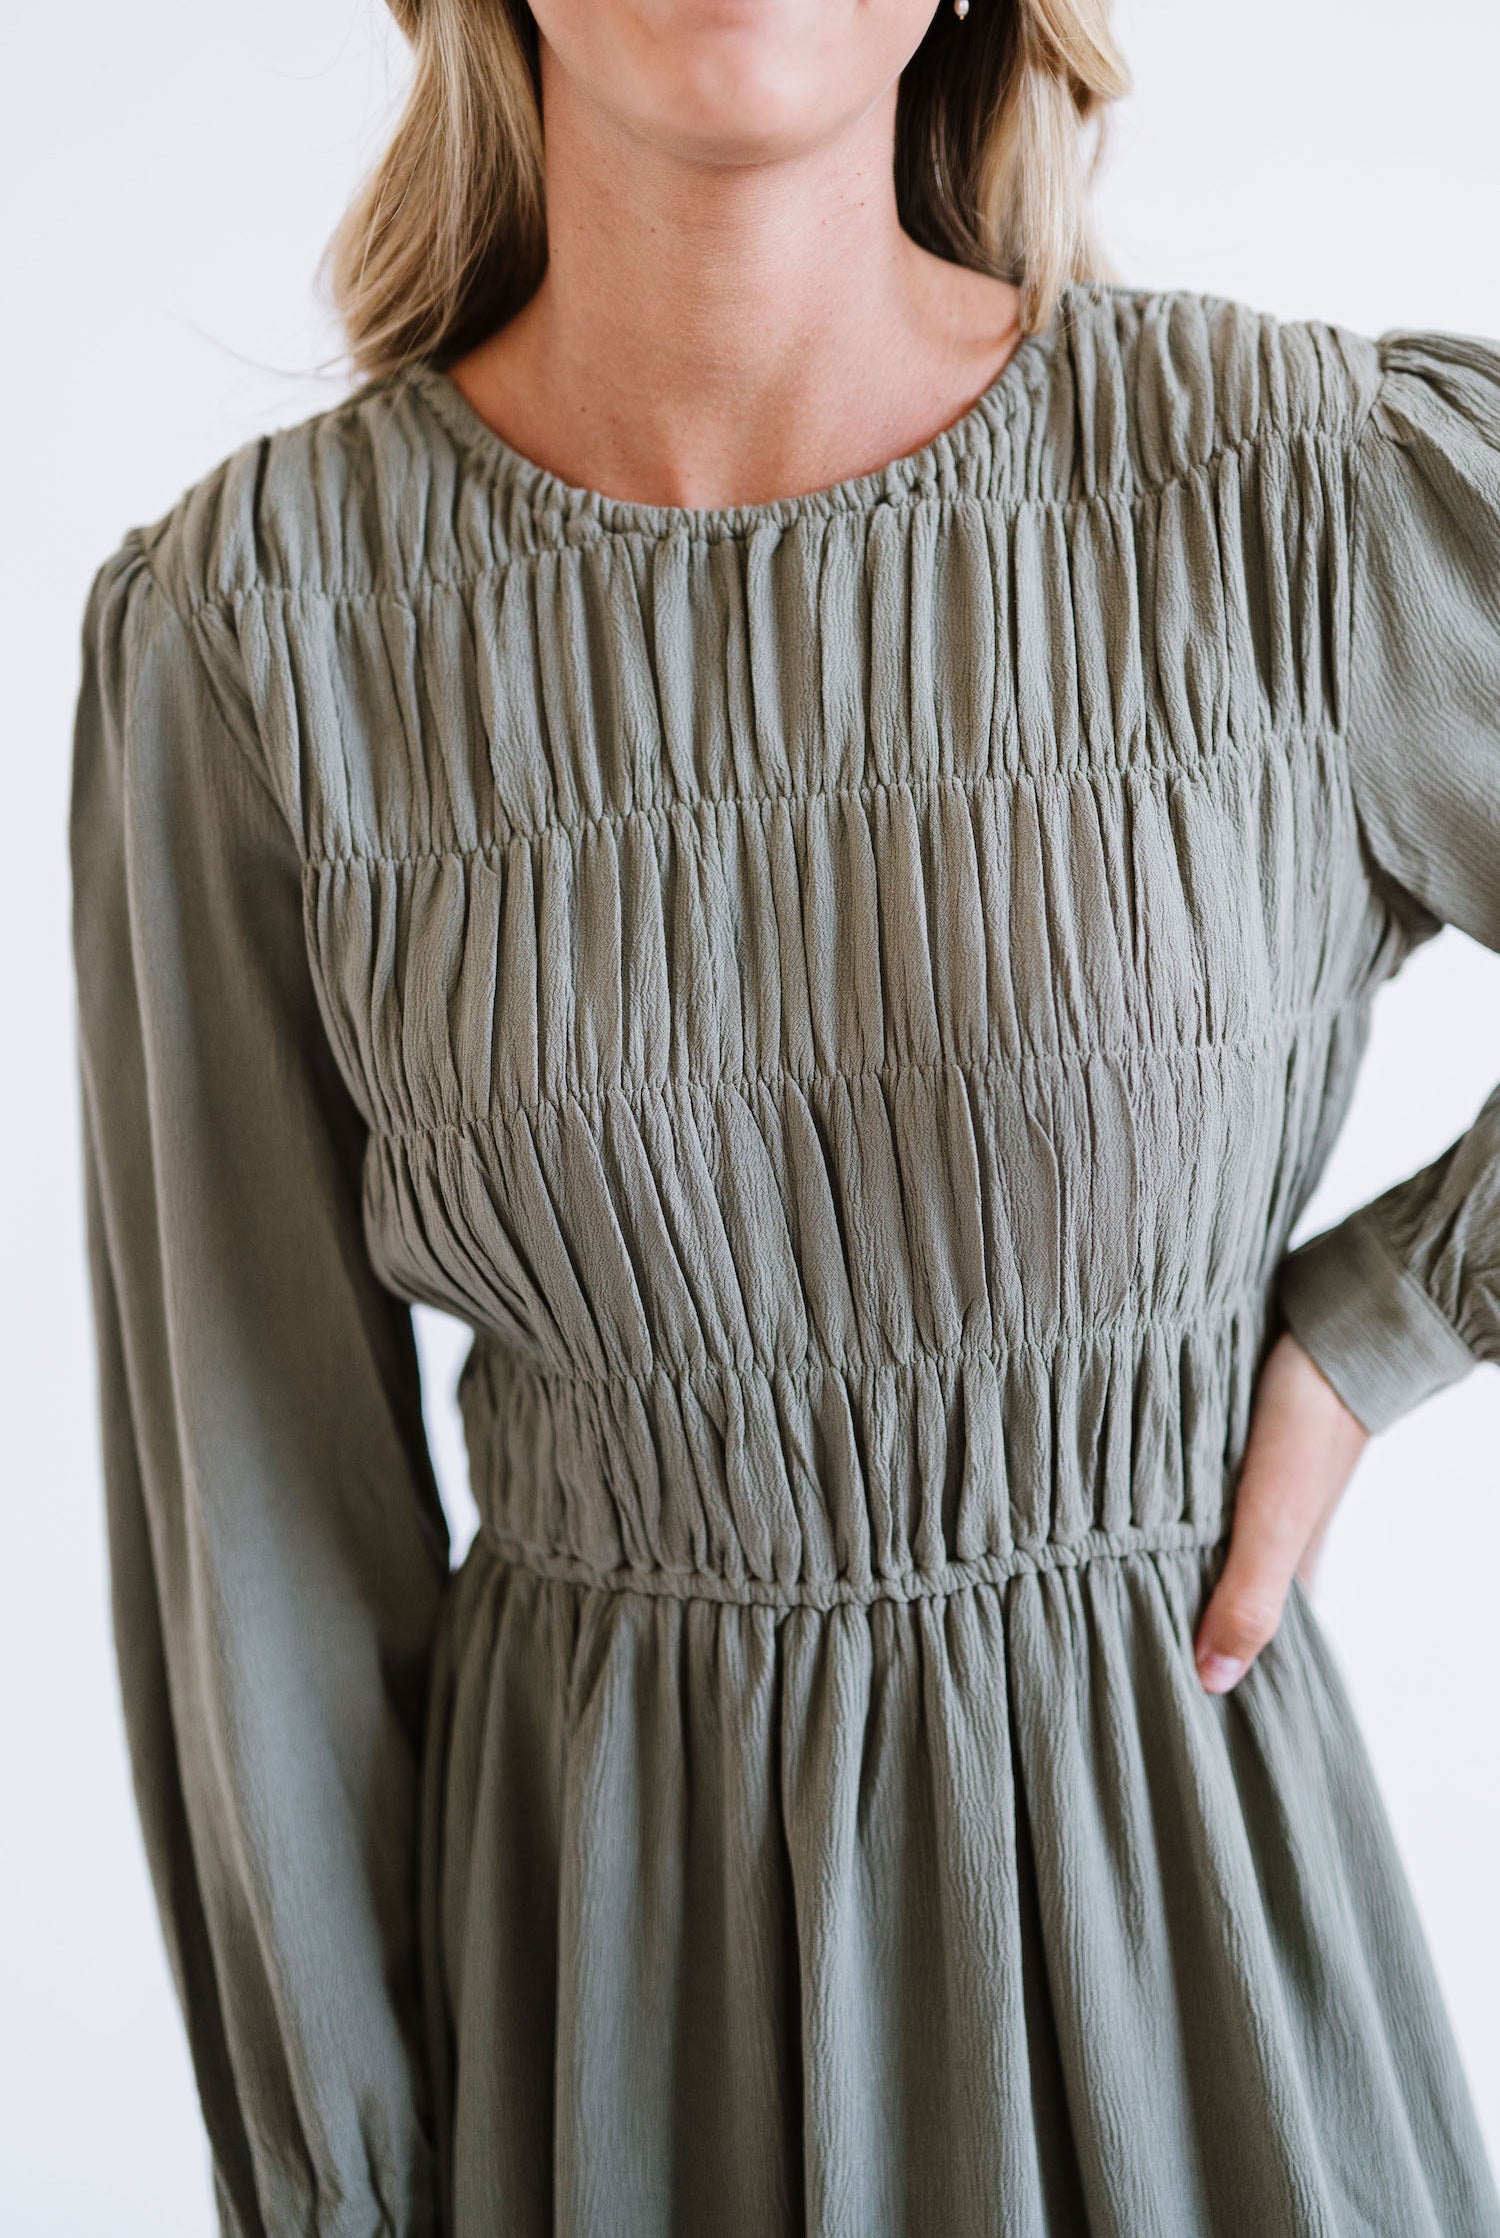 Midi dress with ruched bodice details